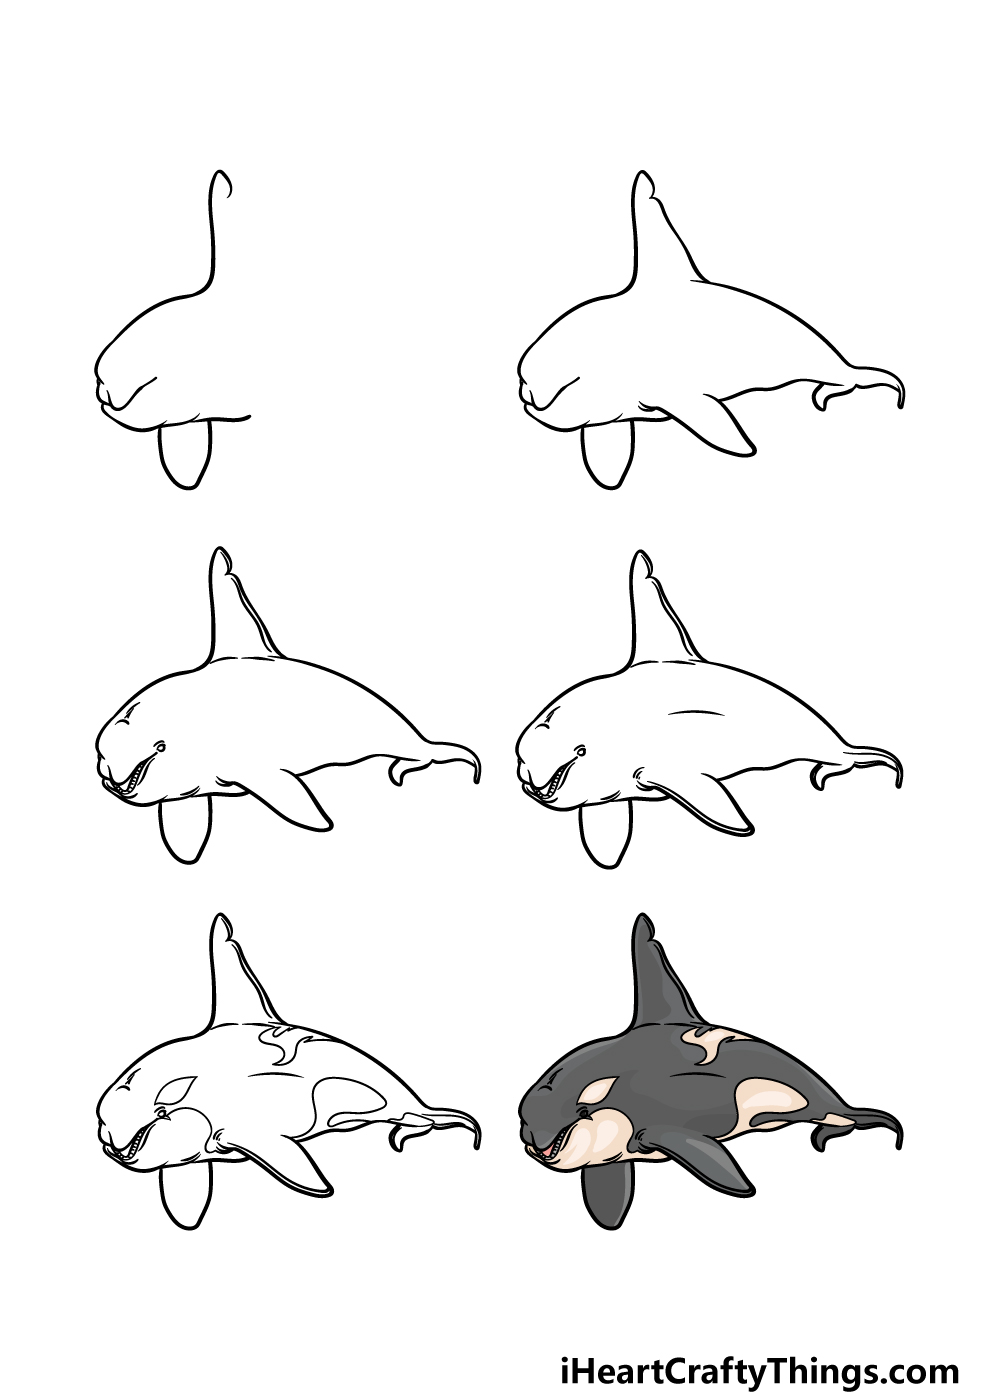 how to draw a killer whale in 6 steps